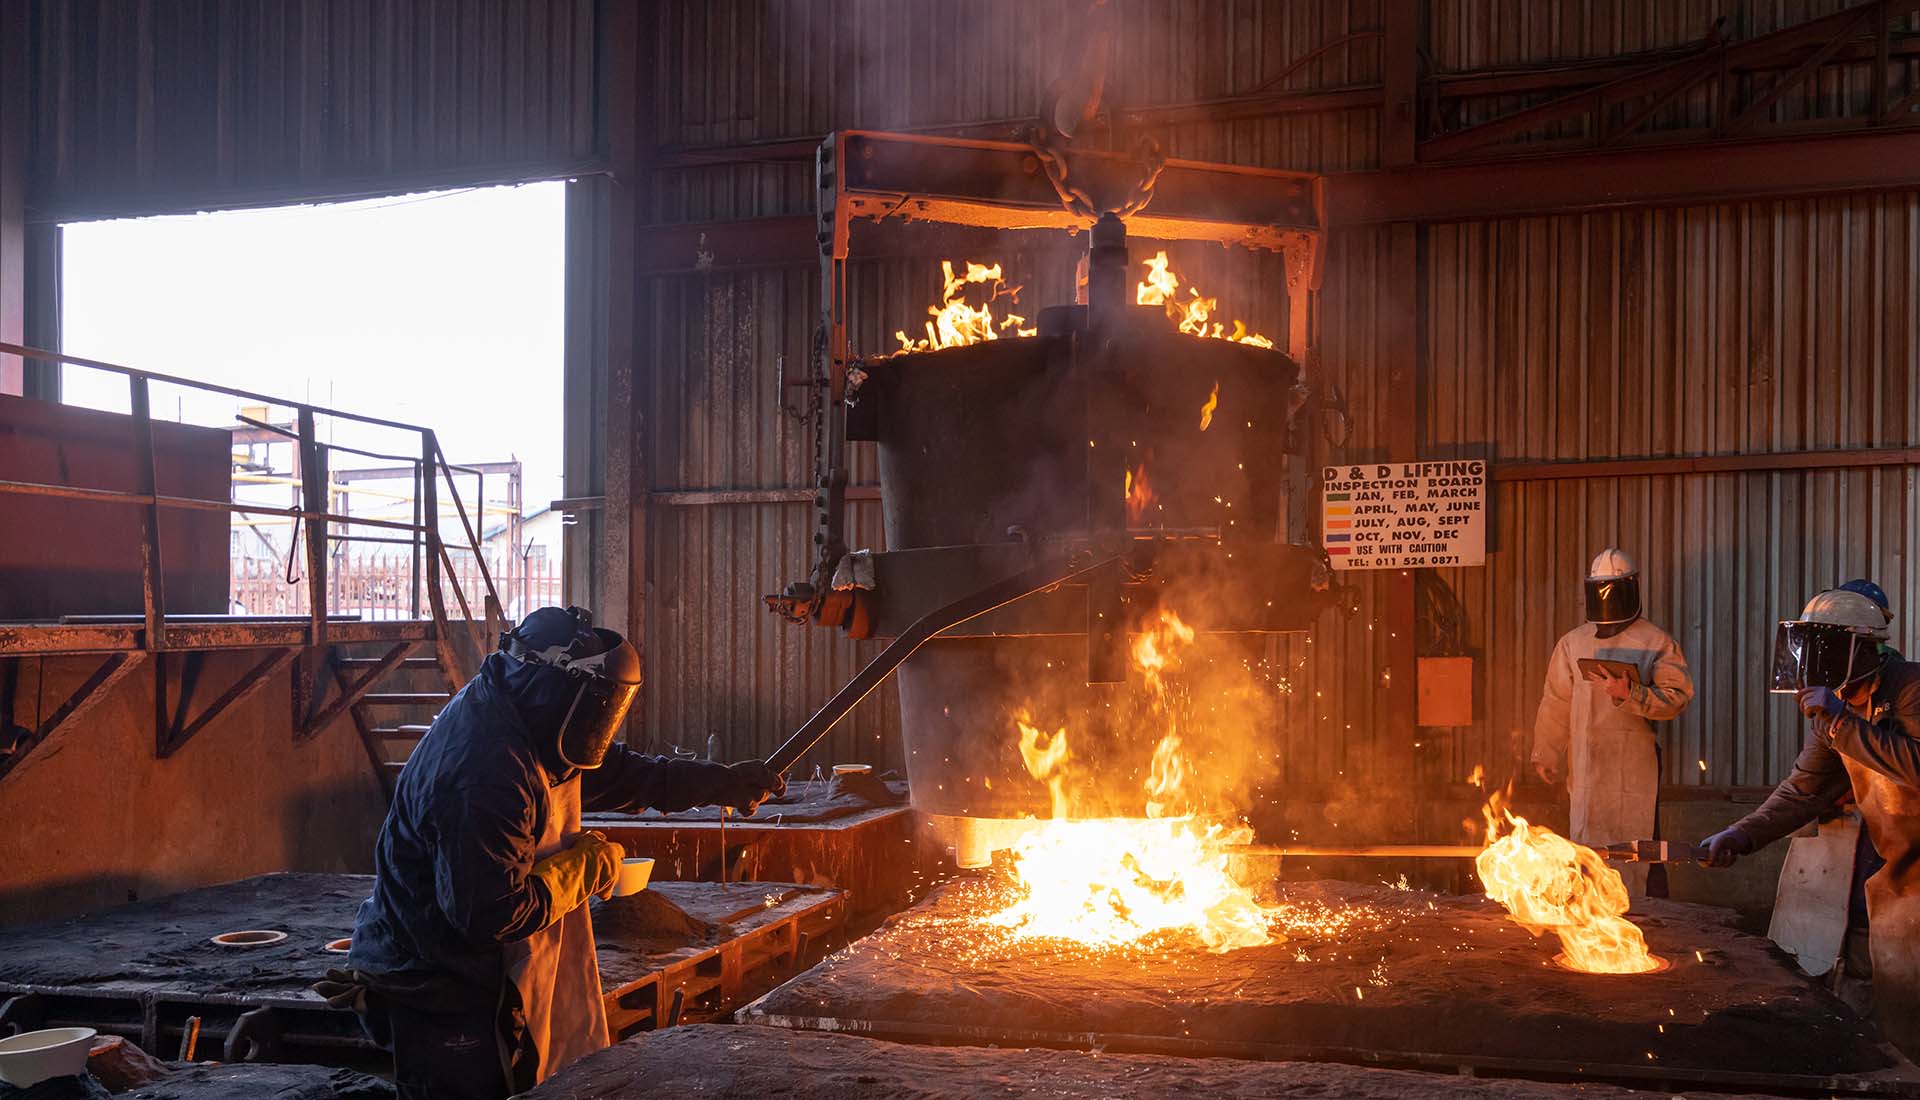 Industrial Photography, Man working in foundry. Prima Foundry